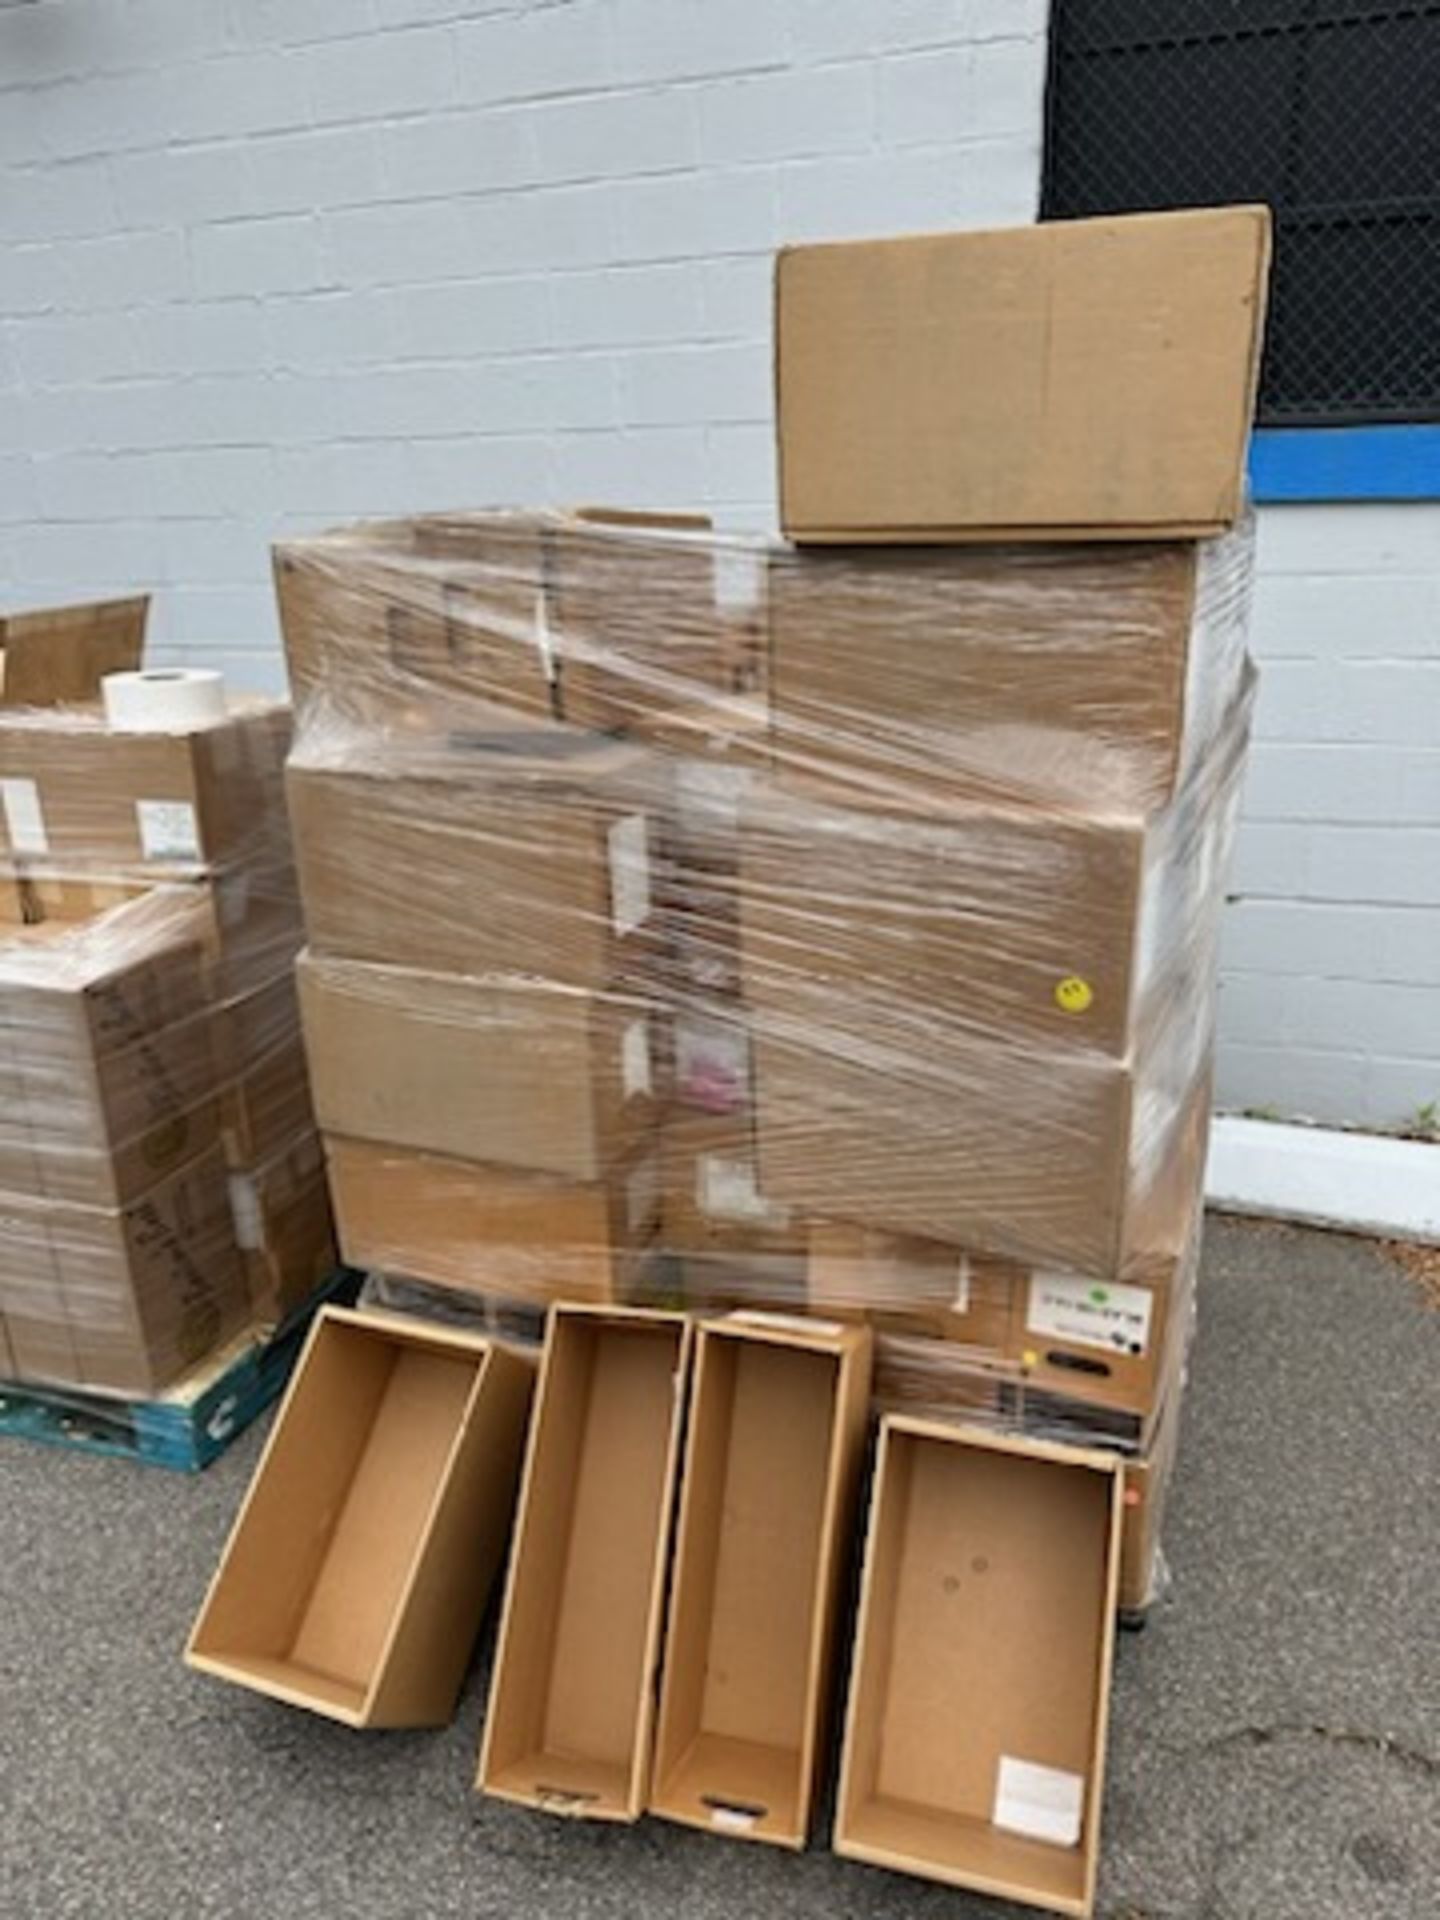 Pallet of Parts Bins (Info to Come)